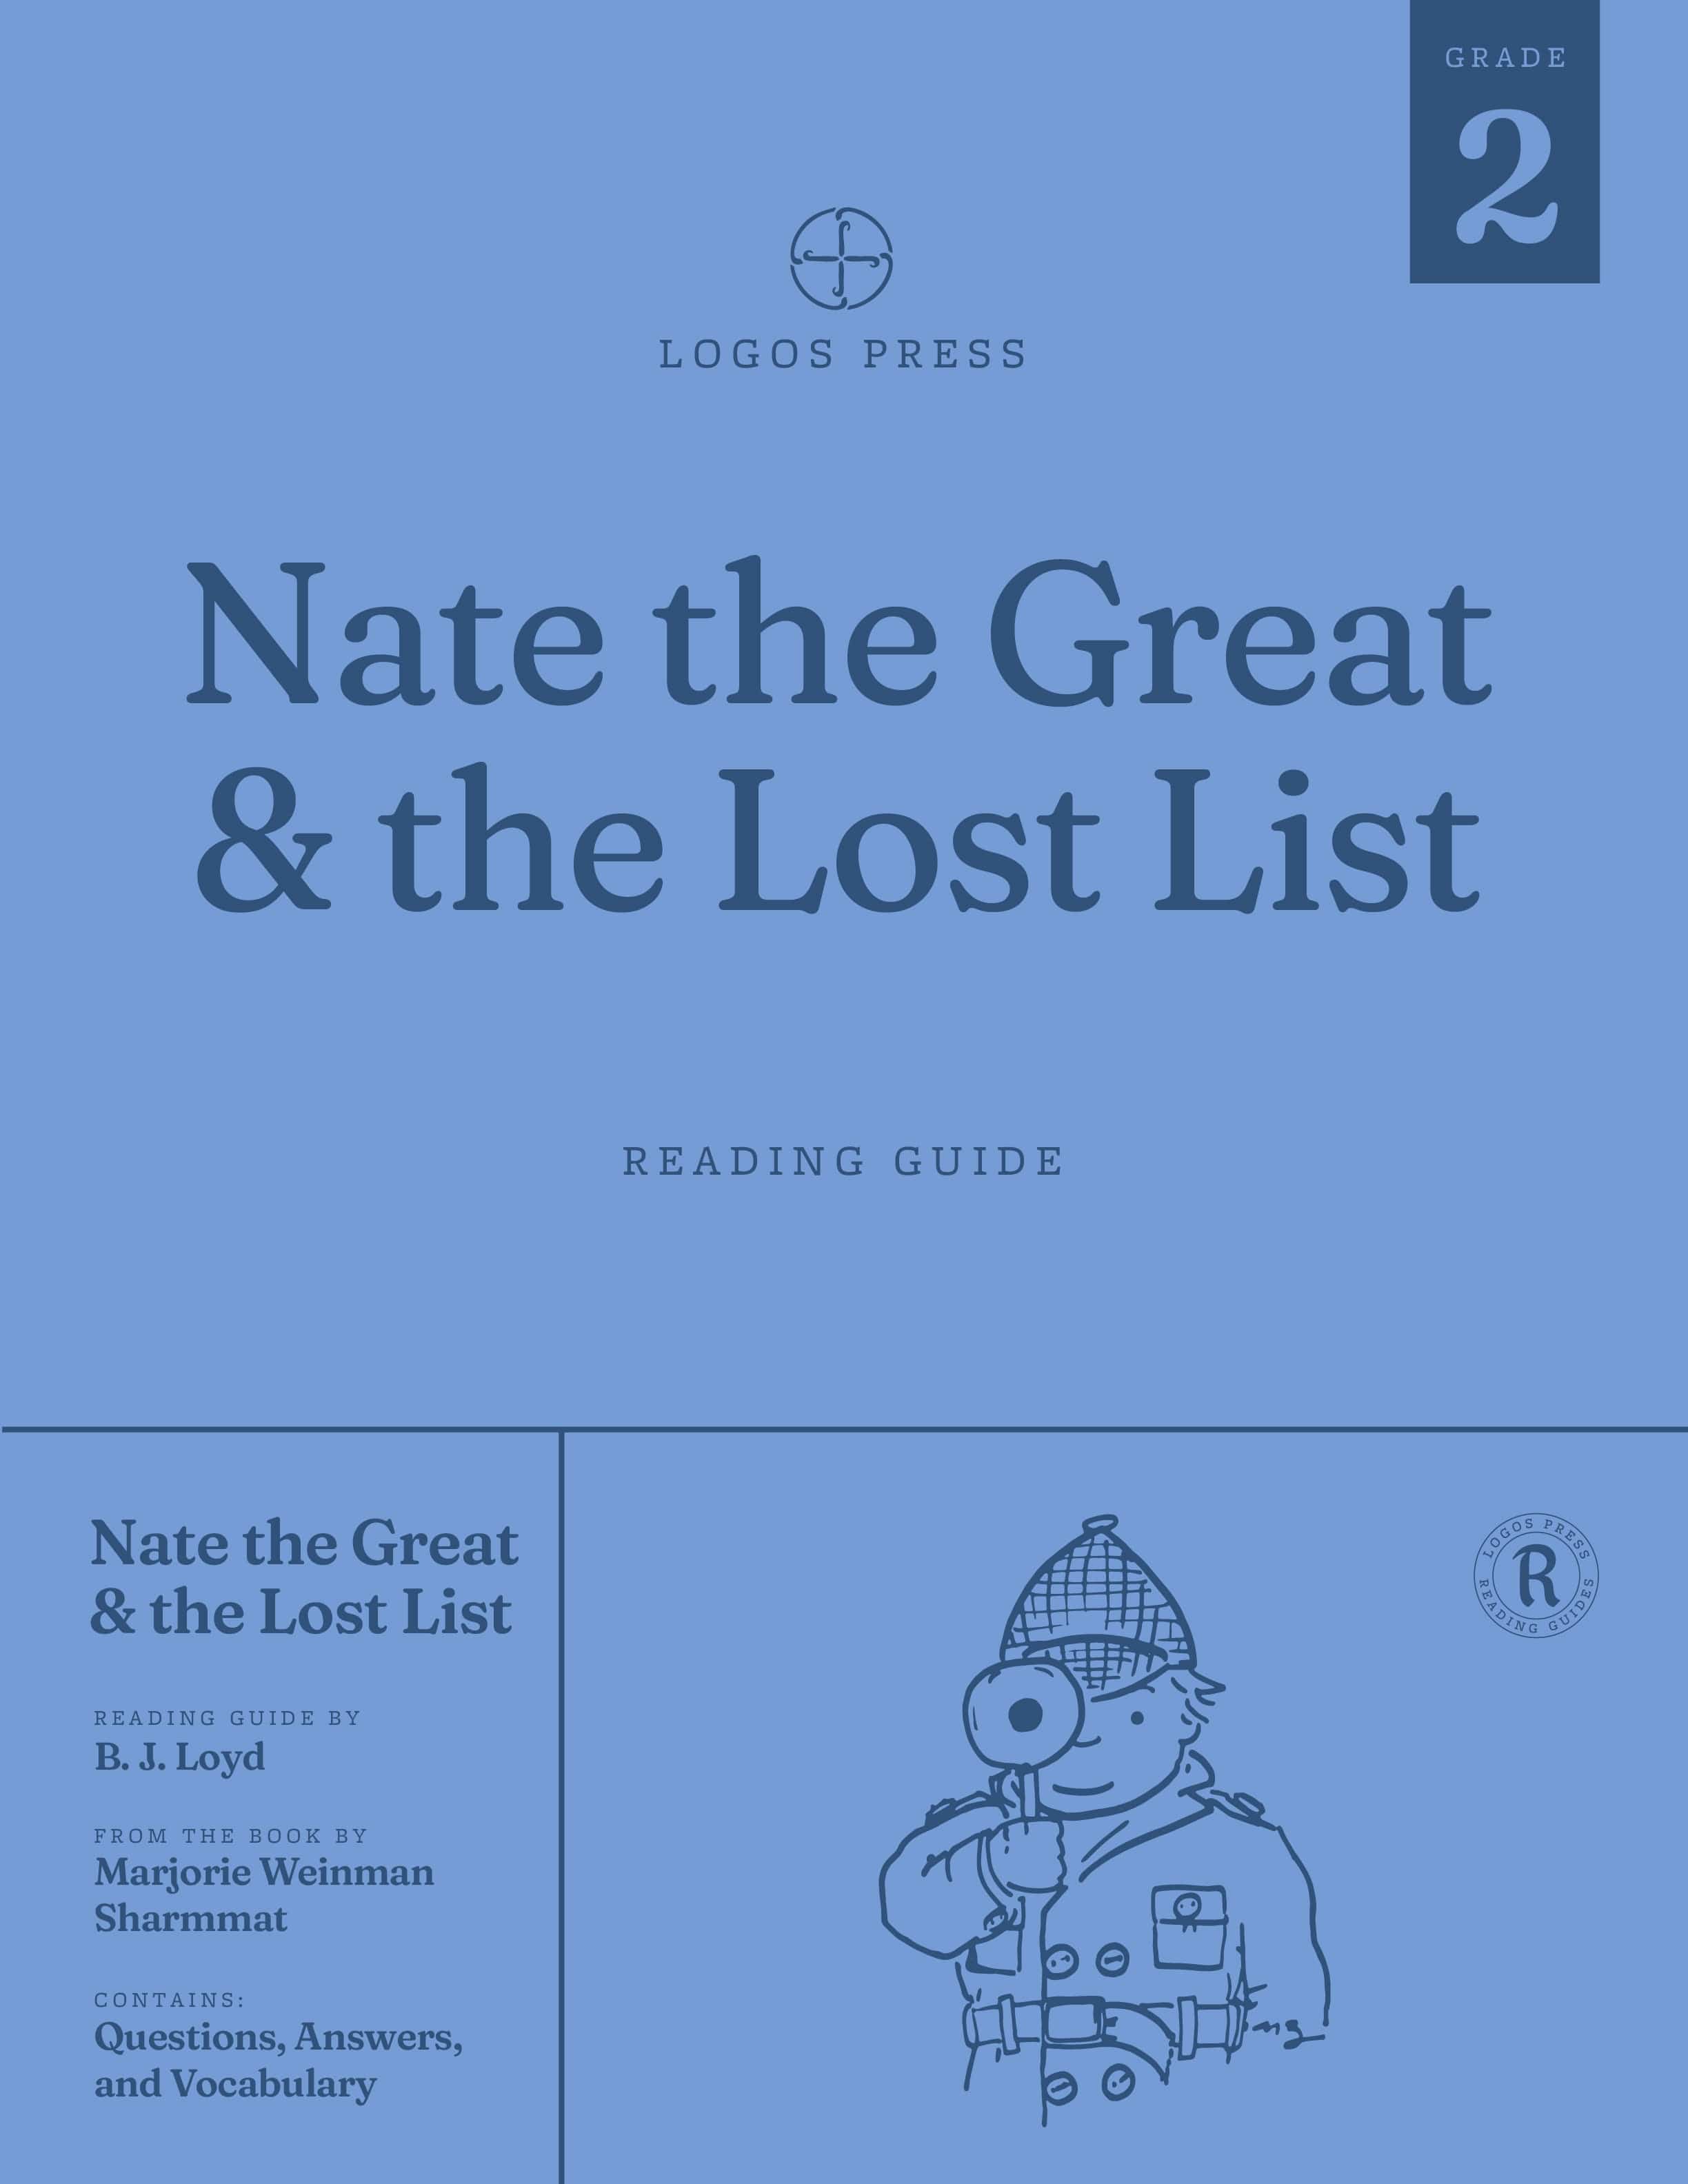 Nate the Great and the Lost List - Reading Guide (Download)